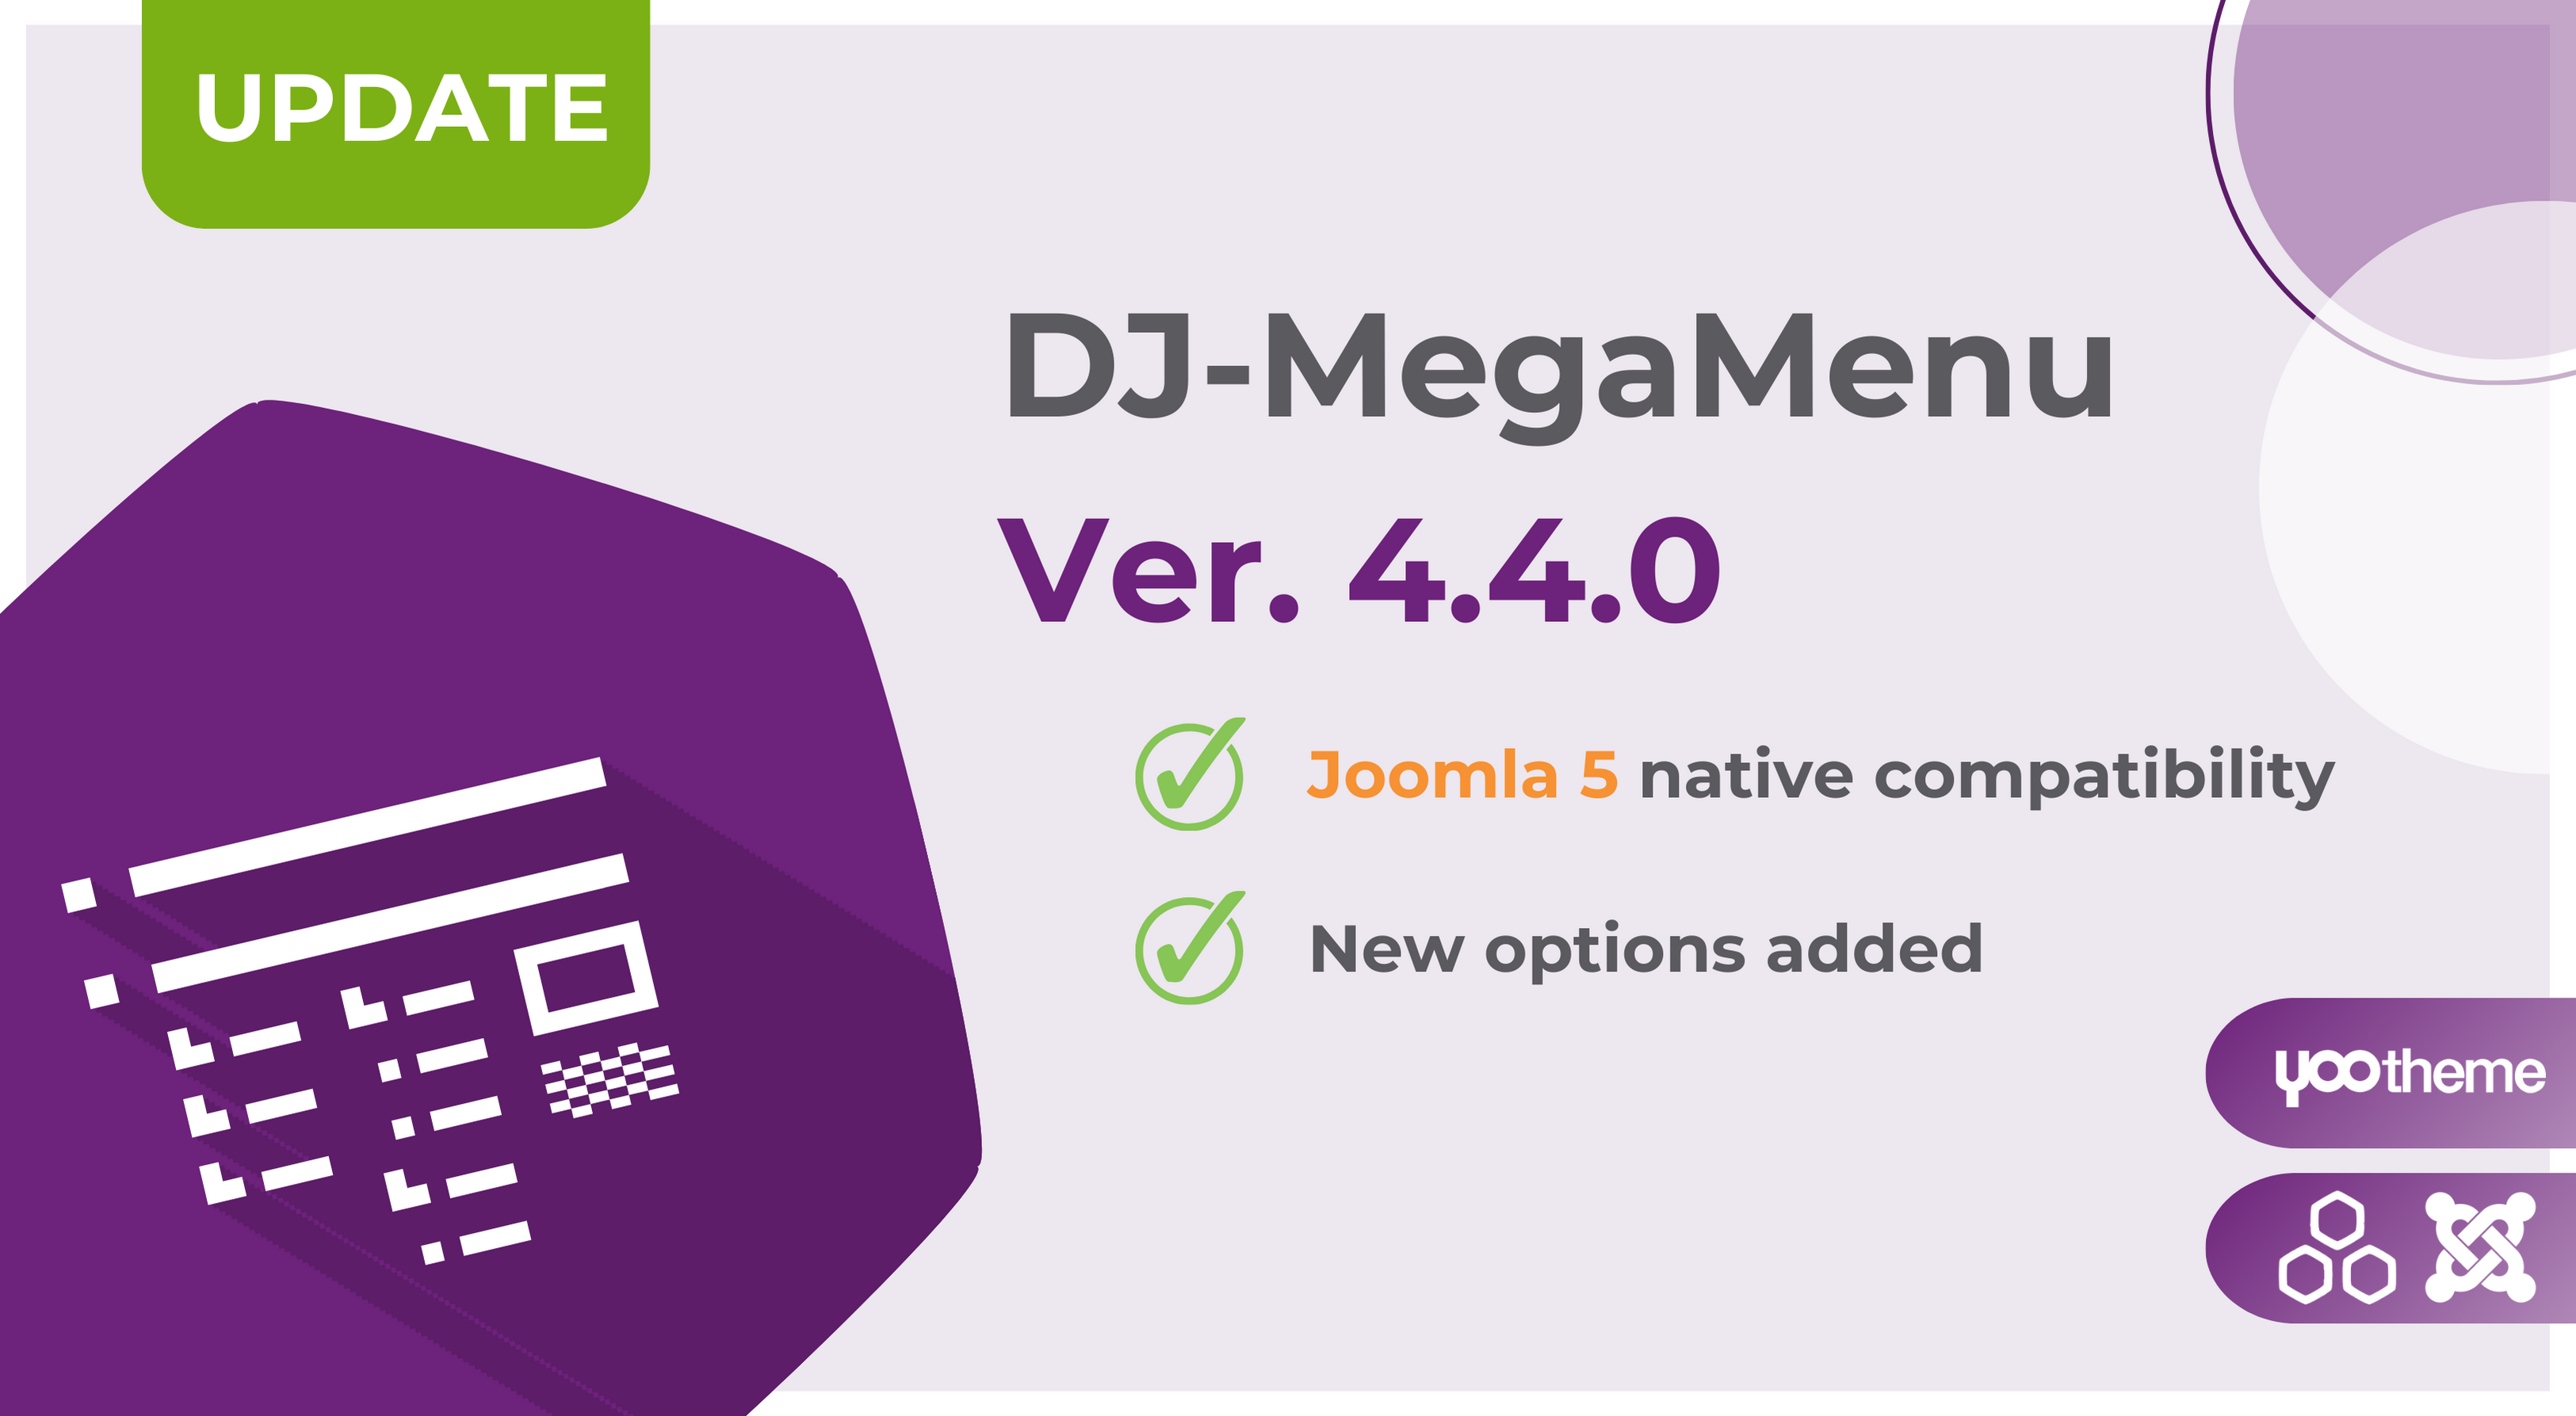 Discover the Power of DJ-MegaMenu 4.4.0 with Joomla 5 Support!